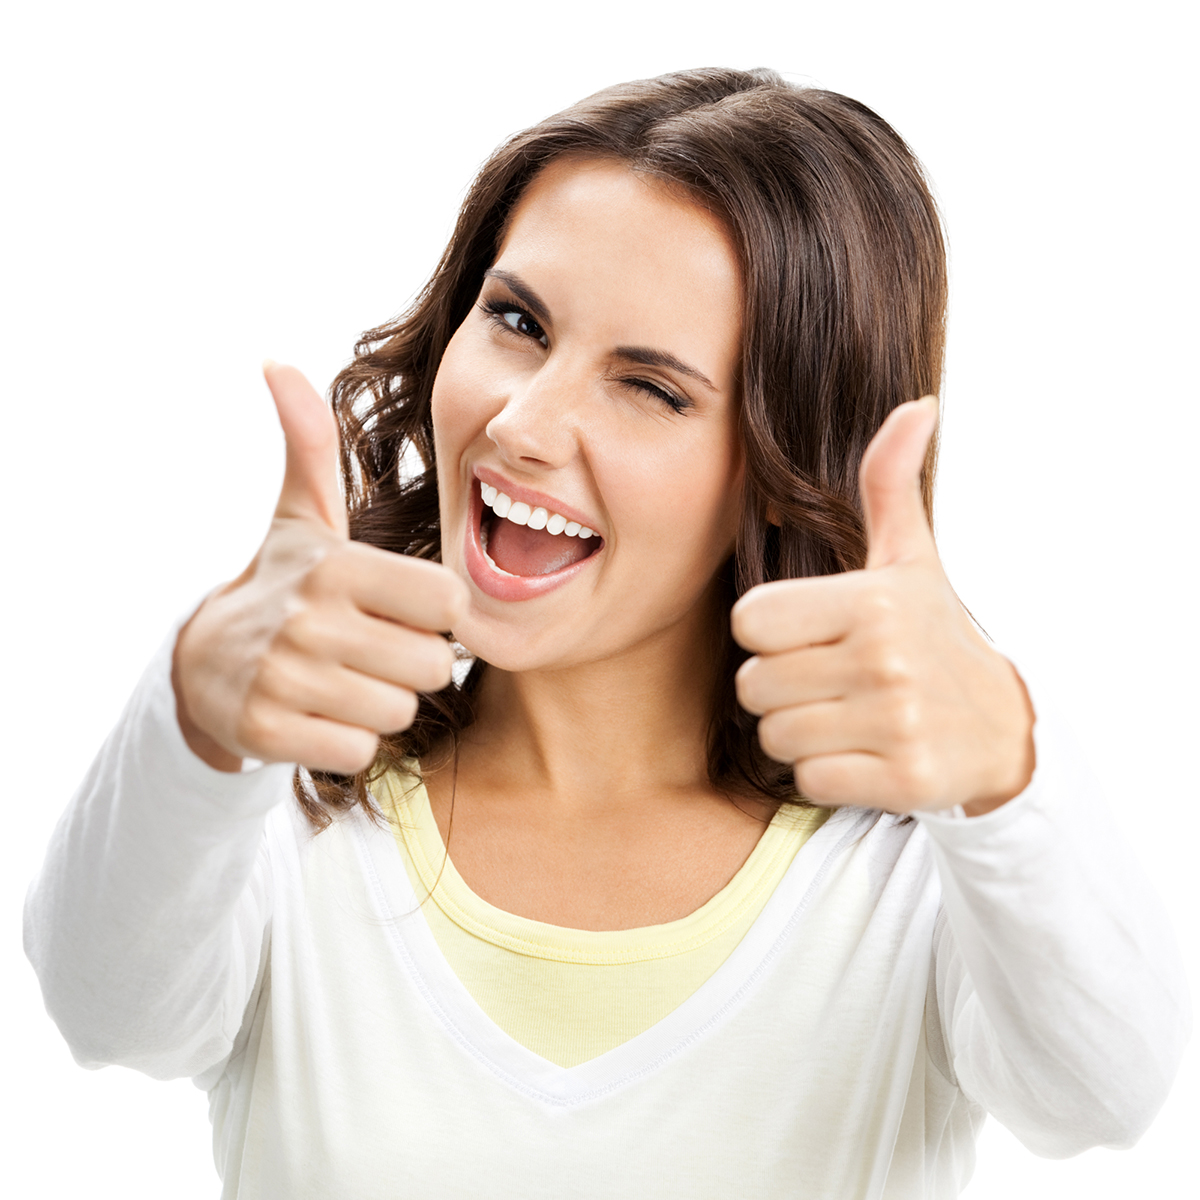 Why reviews matter: a smiling woman showing two thumbs up.